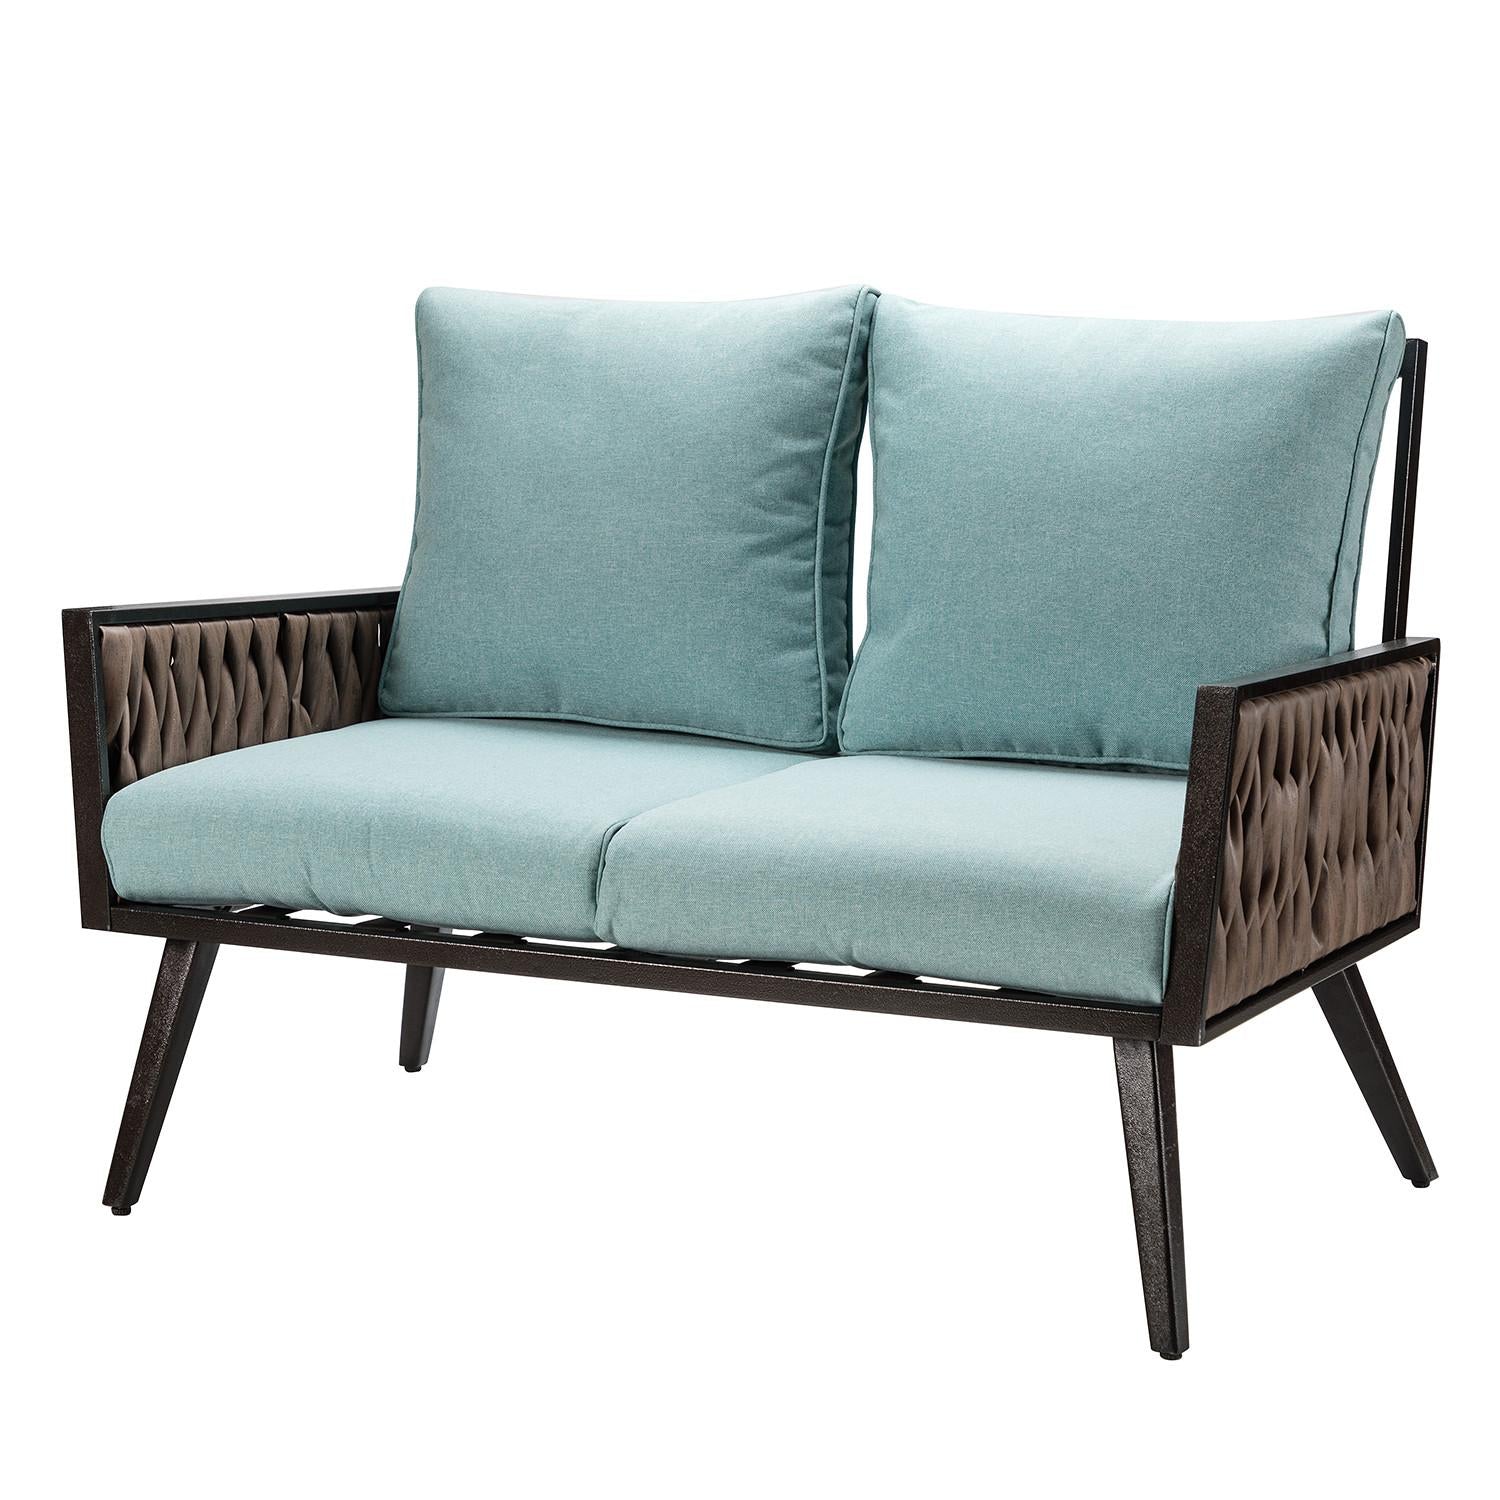 Brown Woven and Pale Aqua Outdoor Sofa Seating and Table Set